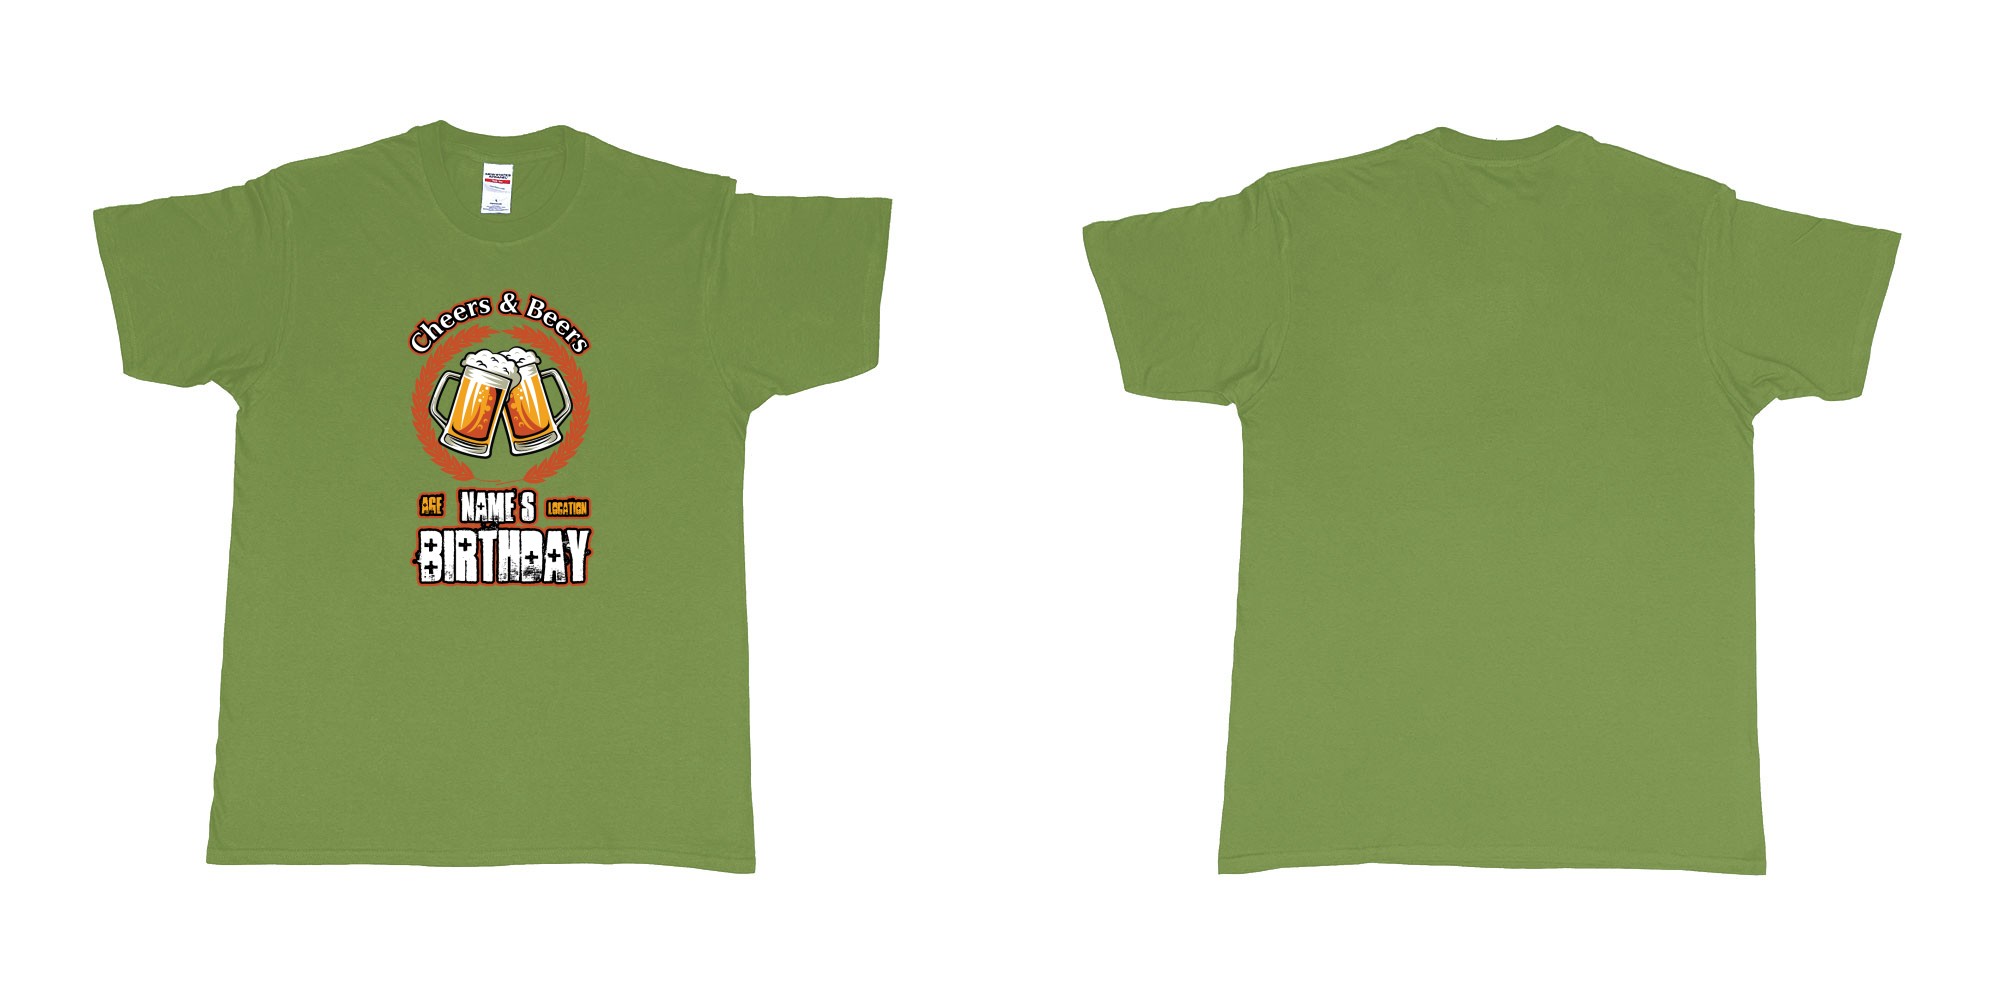 Custom tshirt design cheers and beers birthday in fabric color military-green choice your own text made in Bali by The Pirate Way